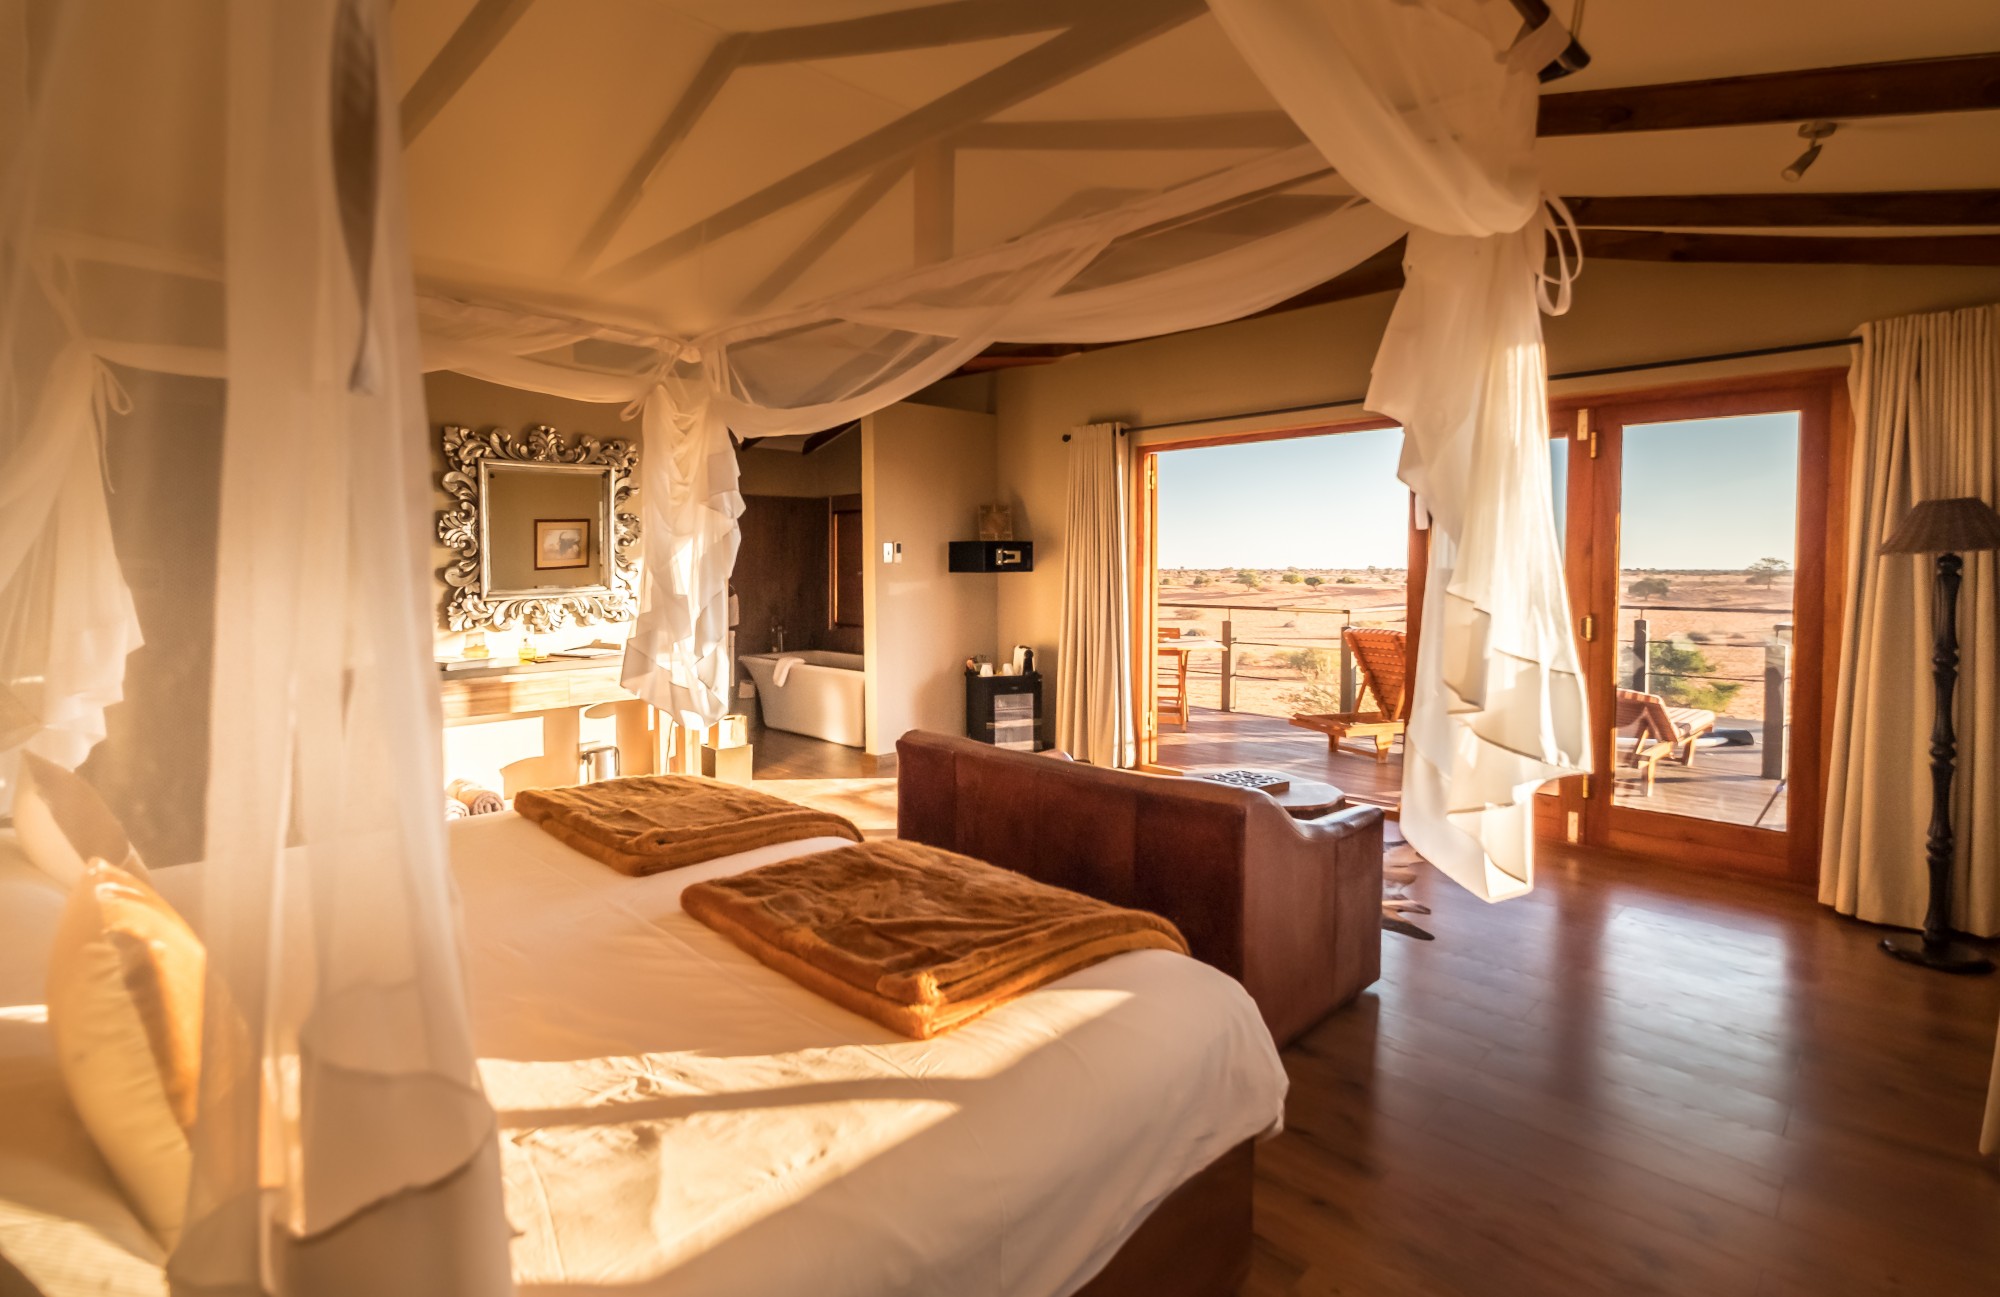 Bagatelle Lodge - Kalahari Game Ranch - Namibia -Guest room including view